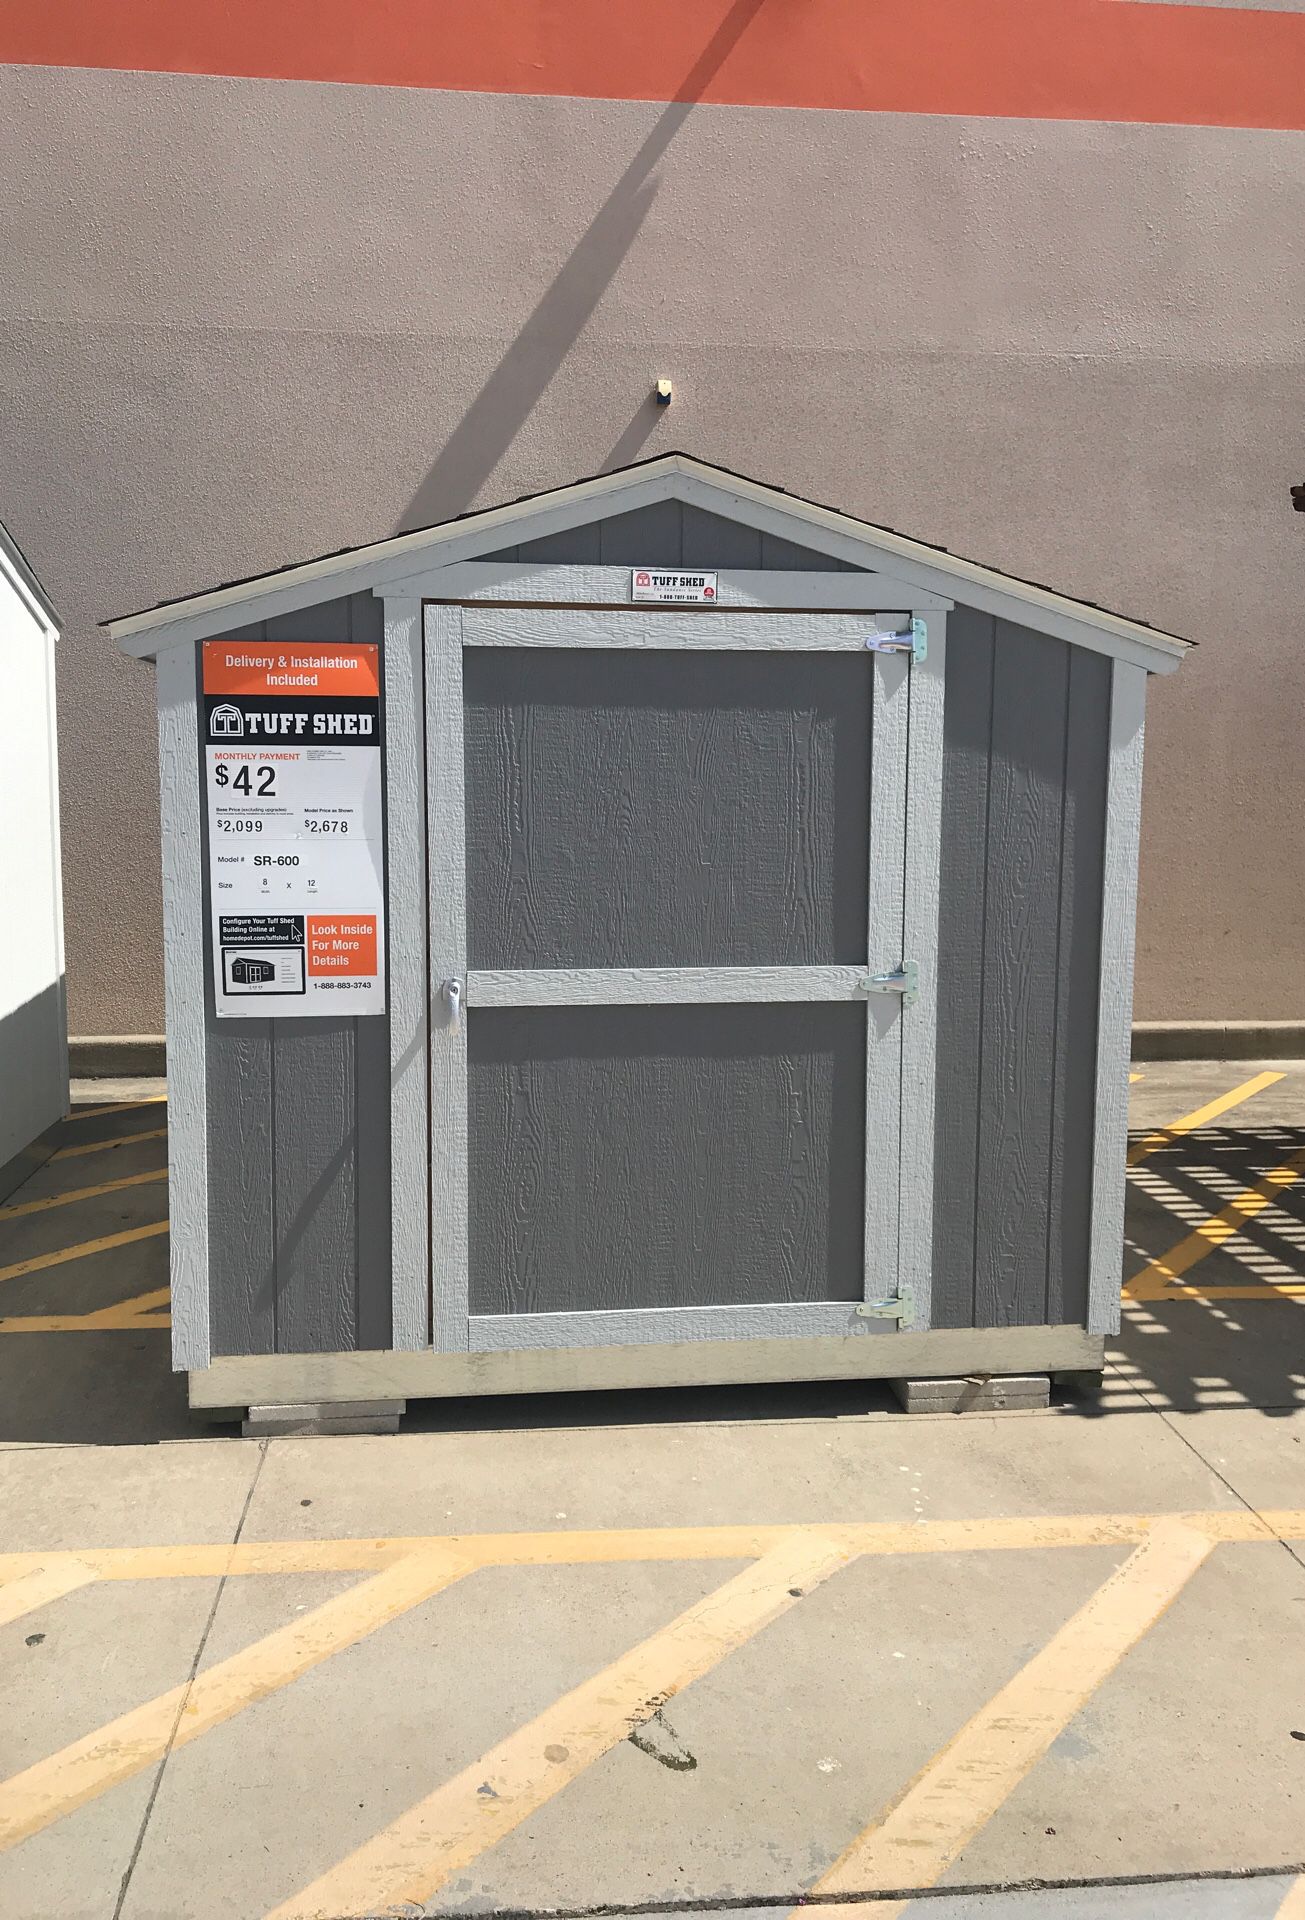 Tuff shed 8x12 sr600 was $2678 now $2410